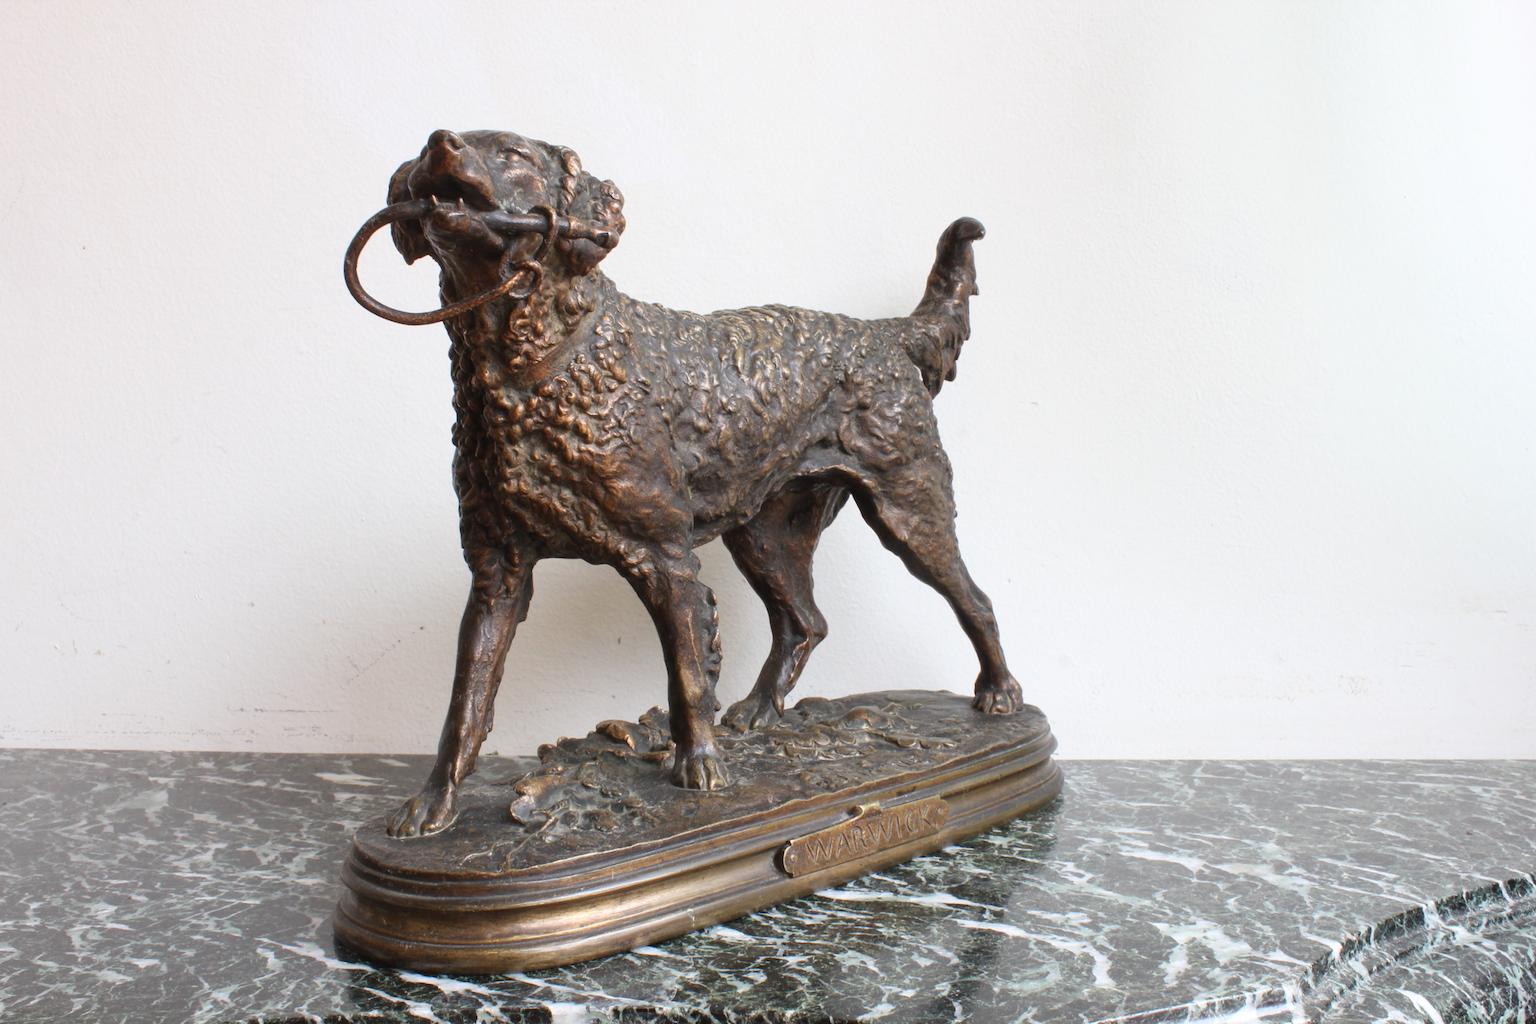 Dog sculpture by Pj Mene, Warwick
19th century cast iron, large size. In good condition.
Measures: Width 27cm, height 20cm, depth 10cm.